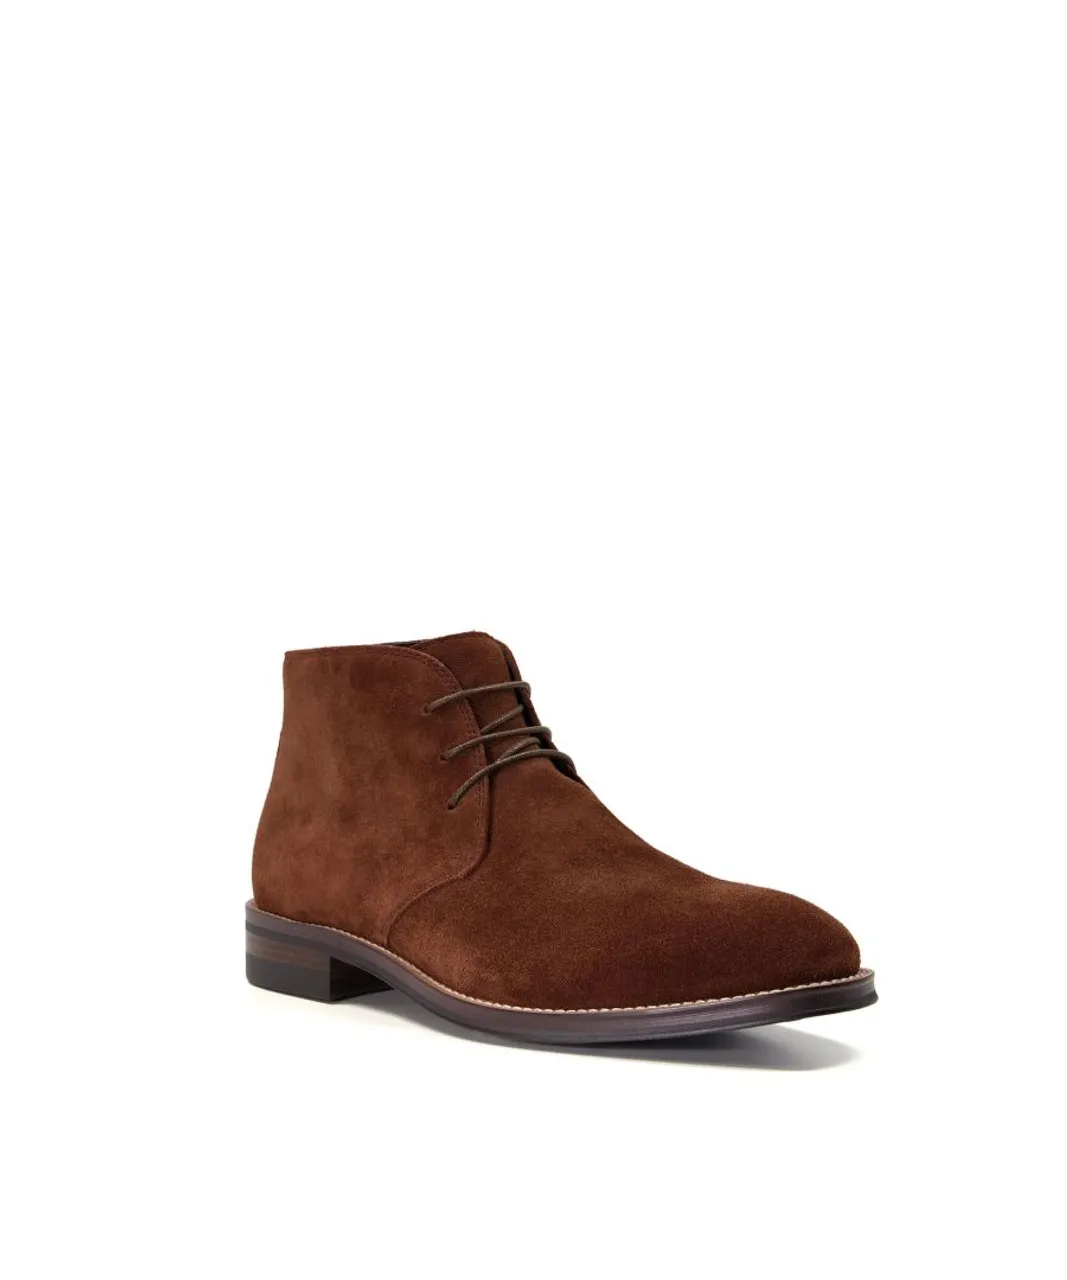 Dune London Mens Maloney - Chukka Boots - Brown Leather (archived)